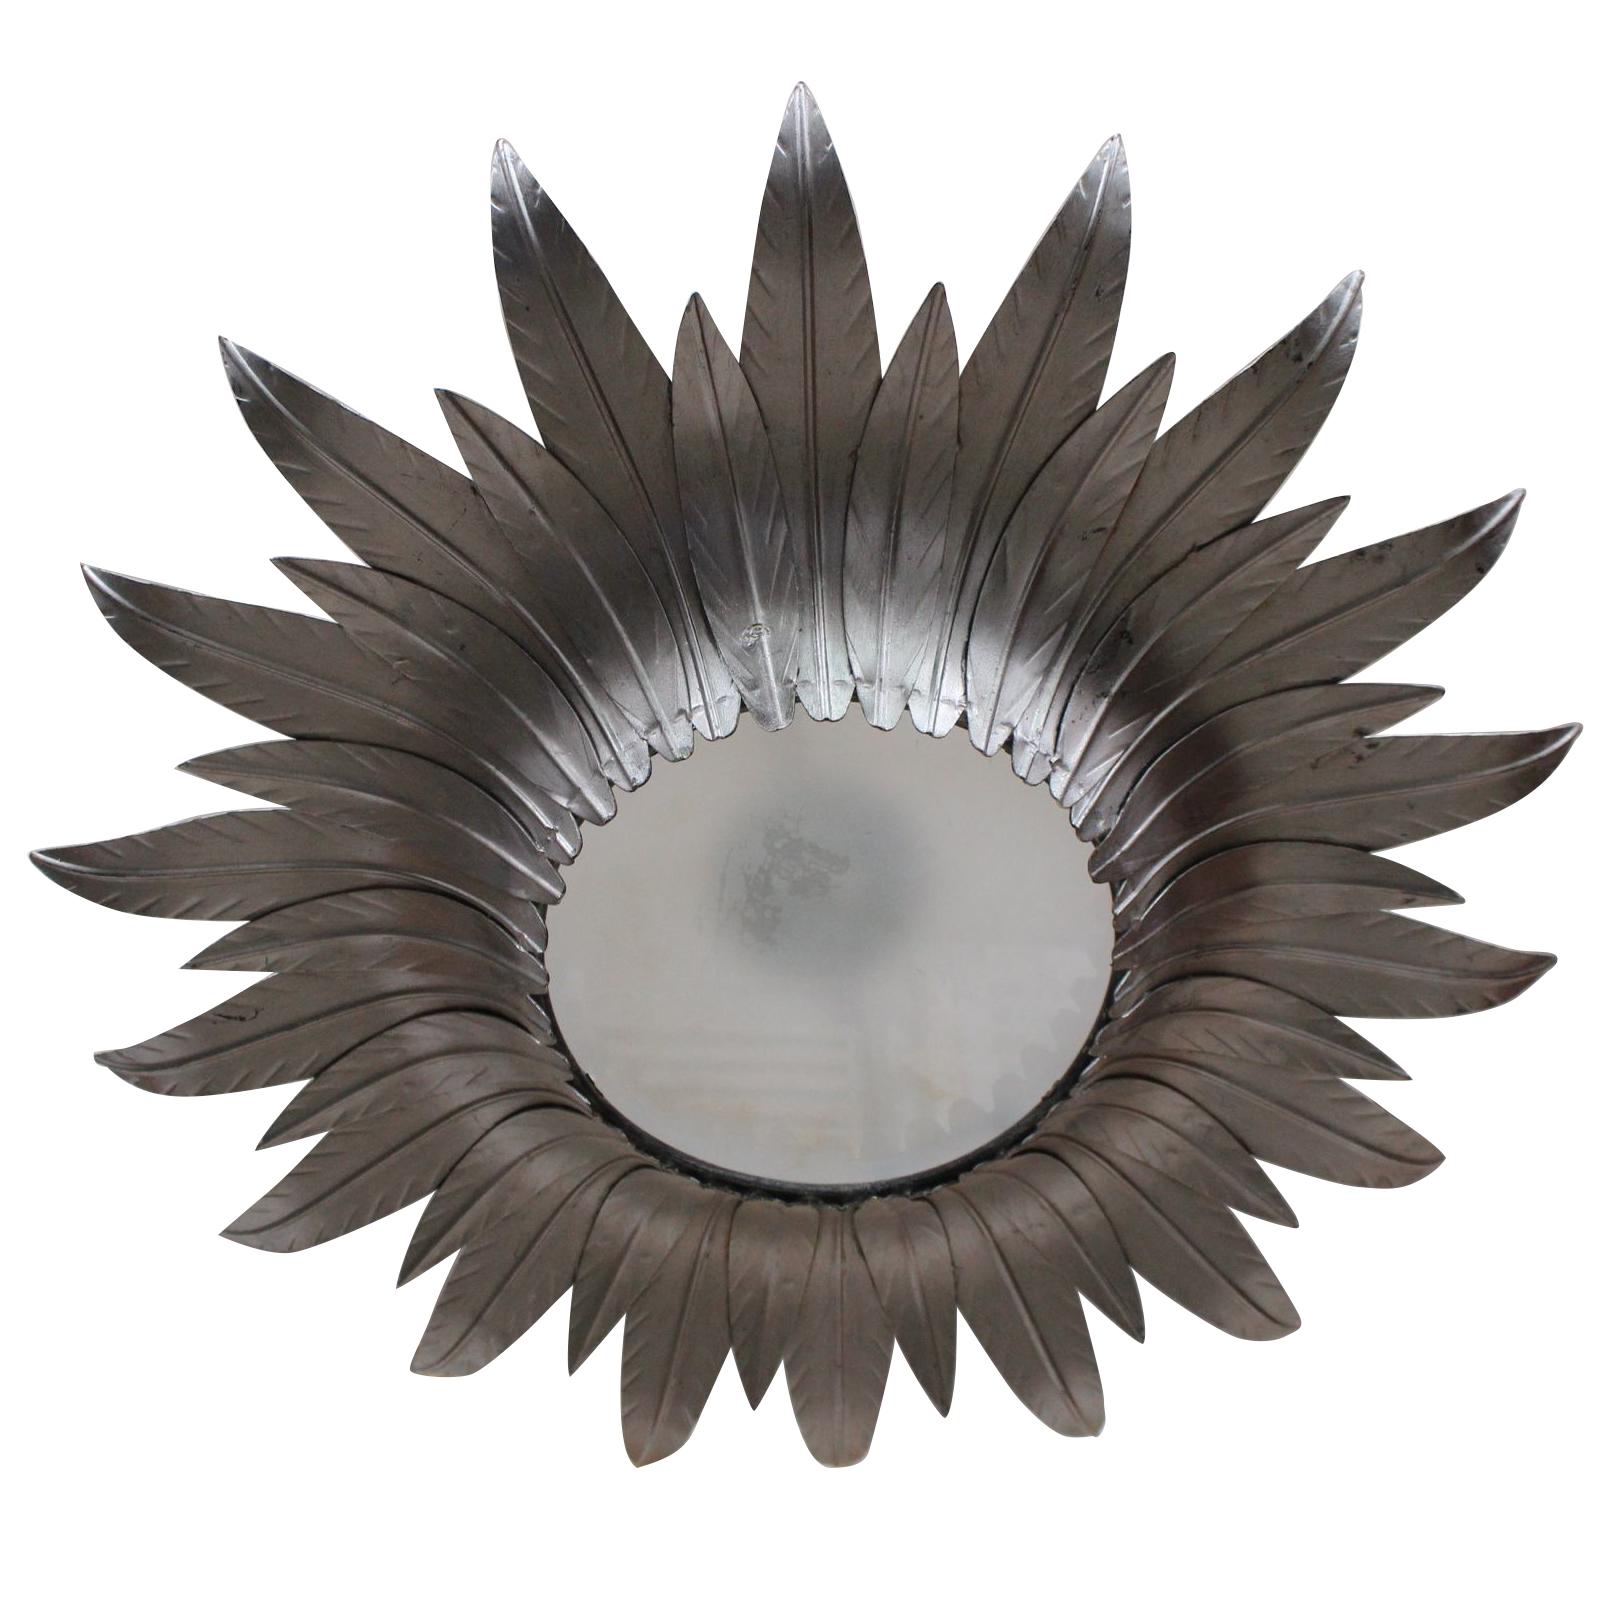 1940s Spanish Silvered Sunburst Ceiling Fixture with Patinated Gold Highlights